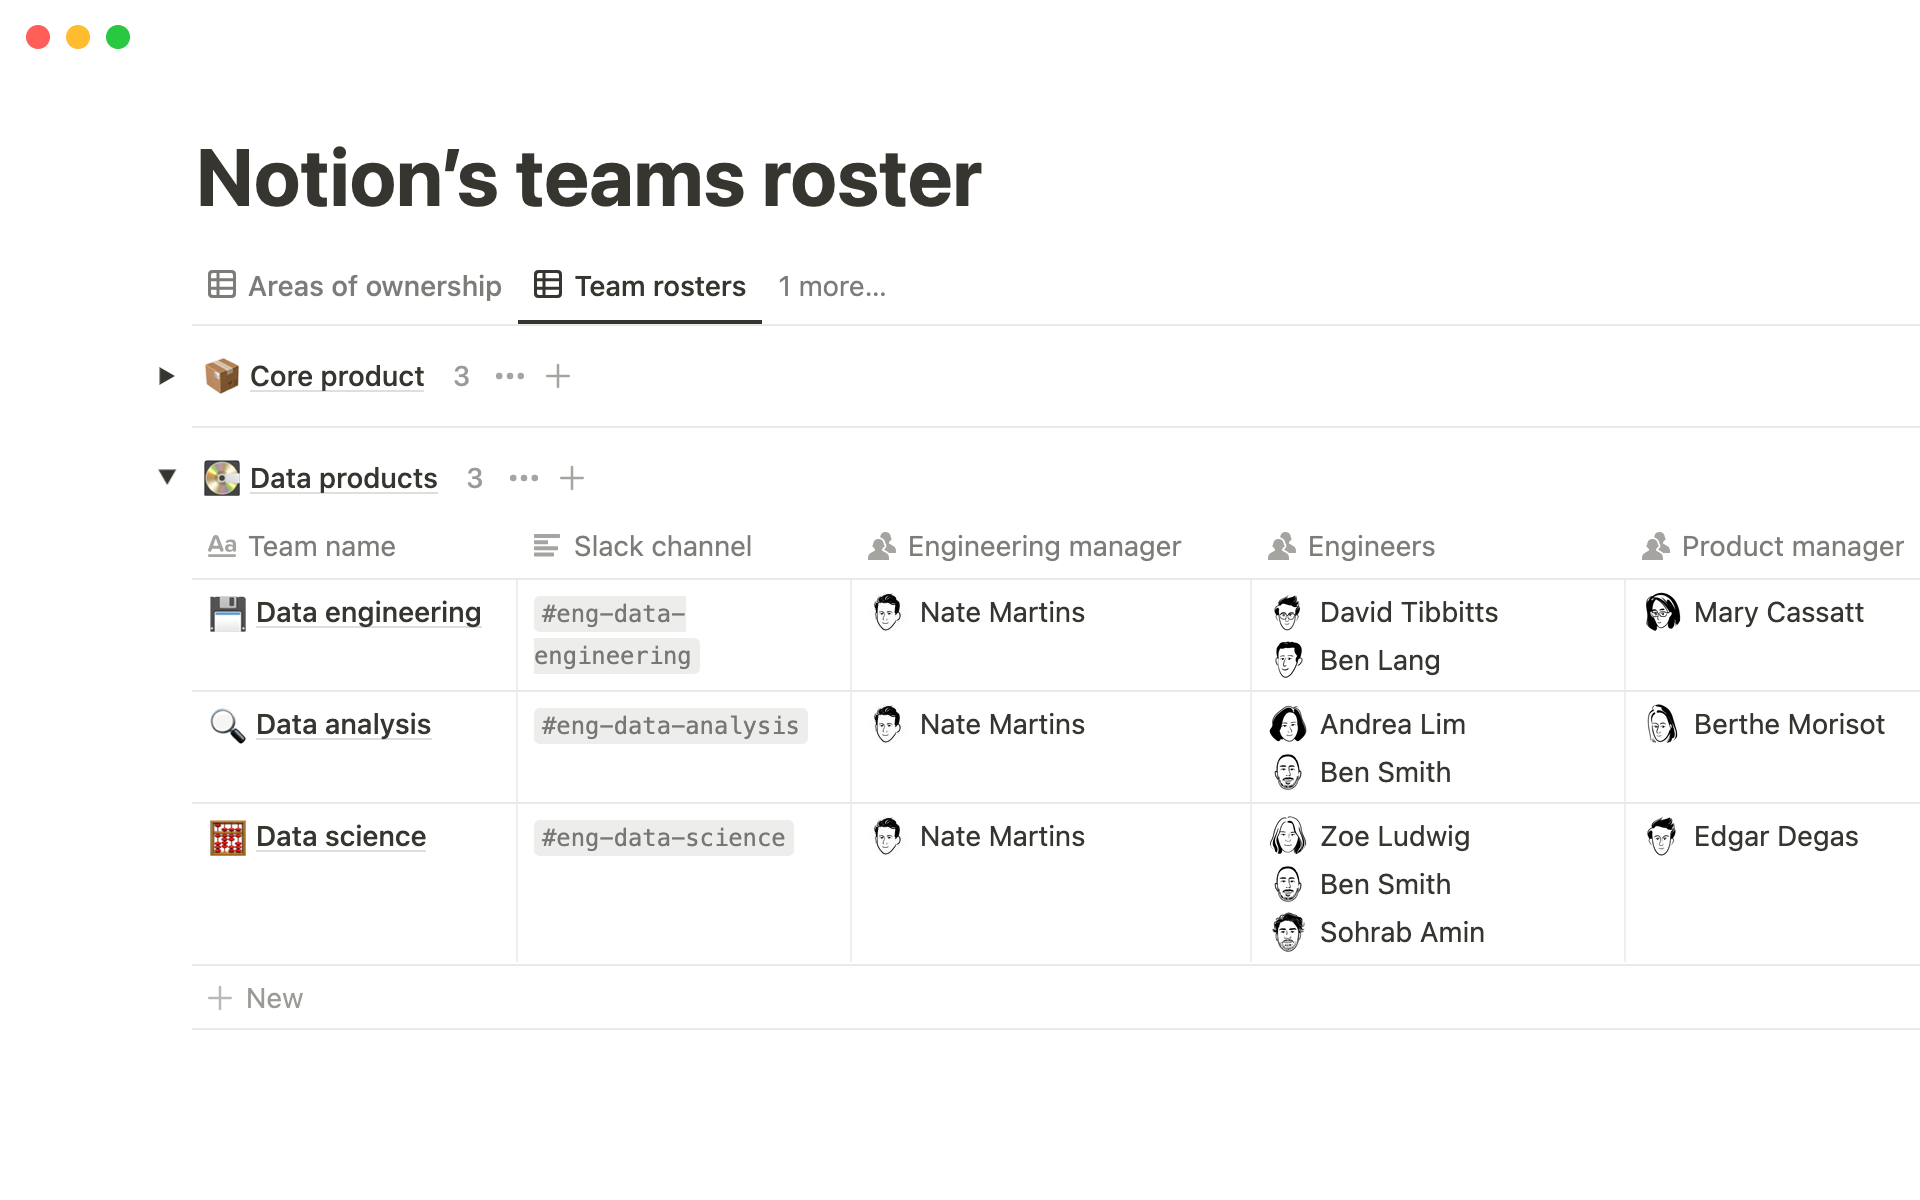 Easily connect different teams with the projects they’re working on.